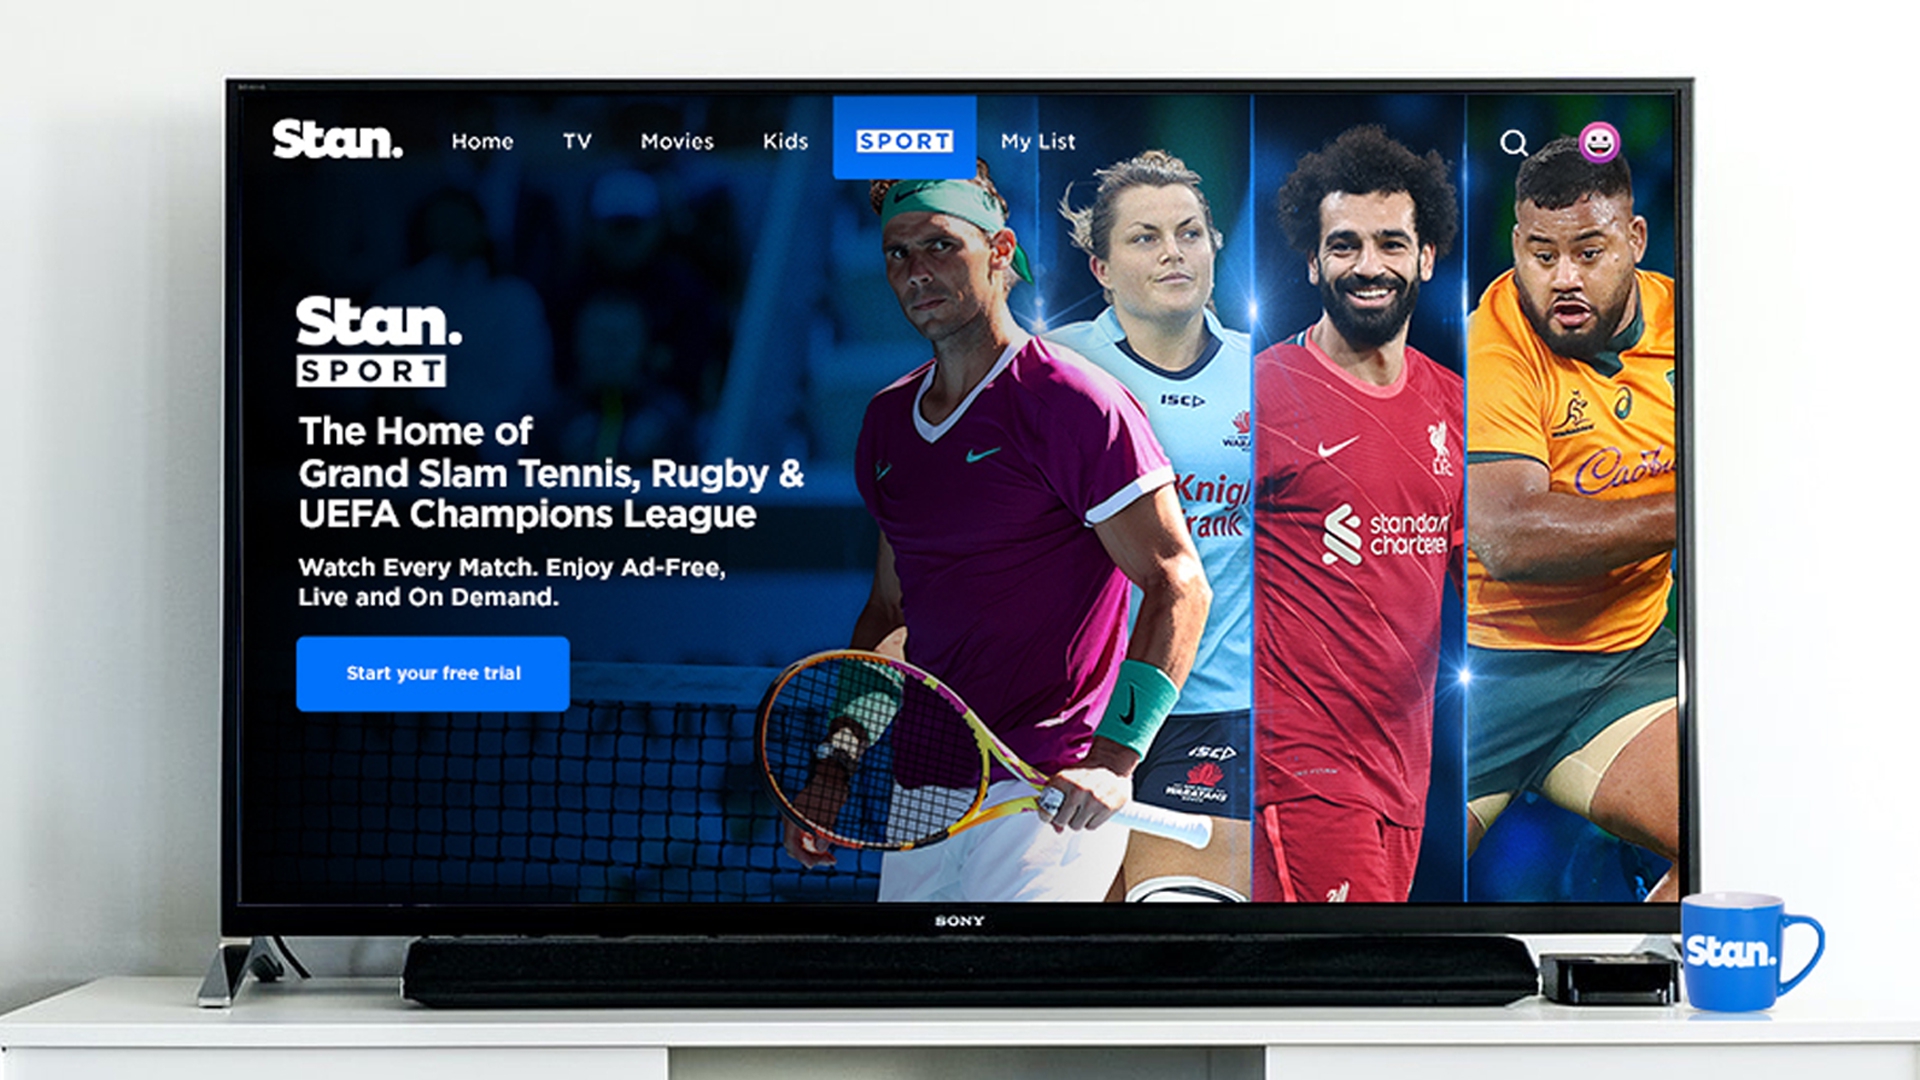 Stan Sport is the Home of Rugby, UEFA Champions League, Grand Slam Tennis & more.